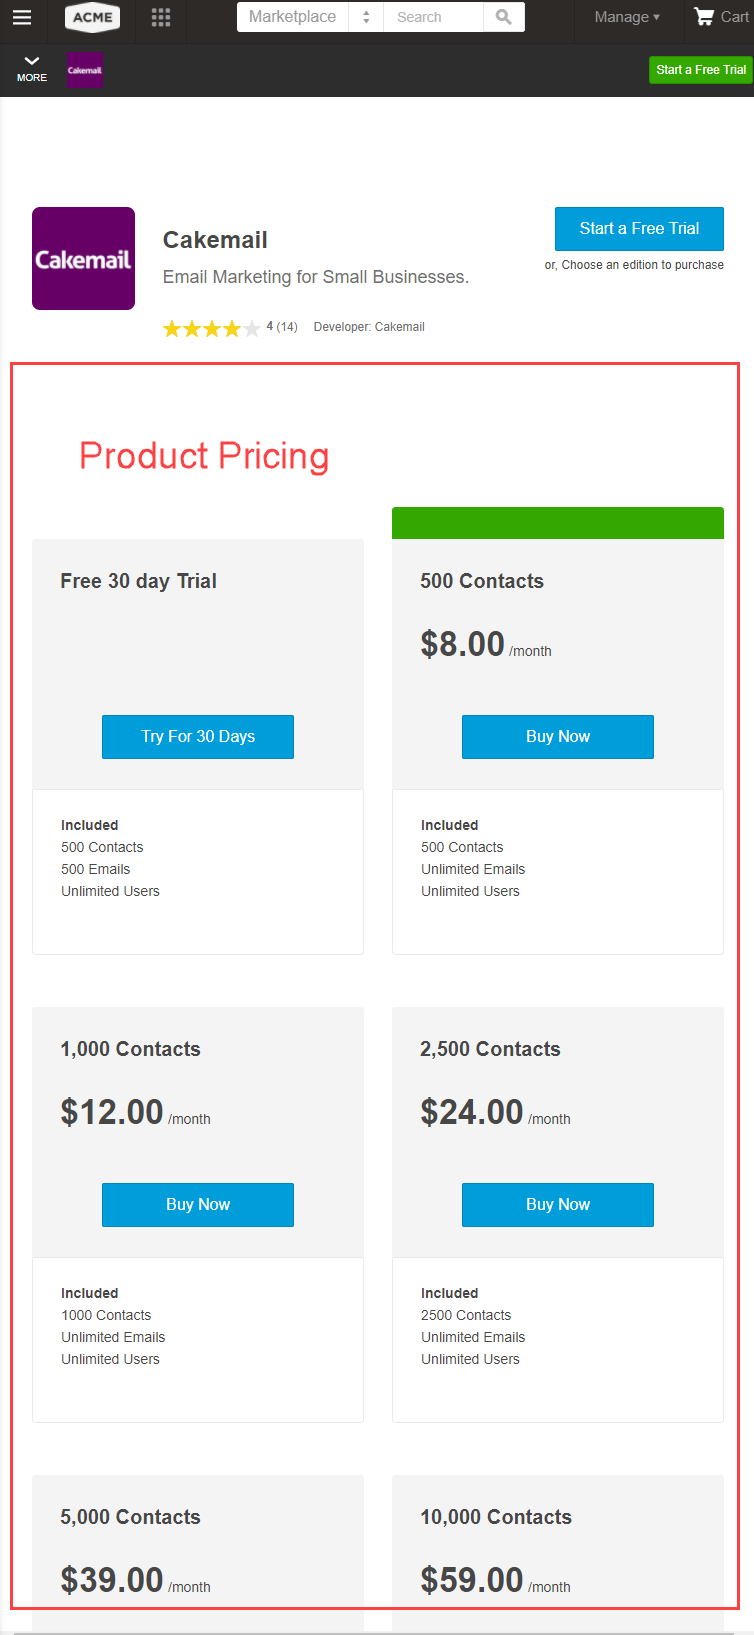 Editions and pricing components